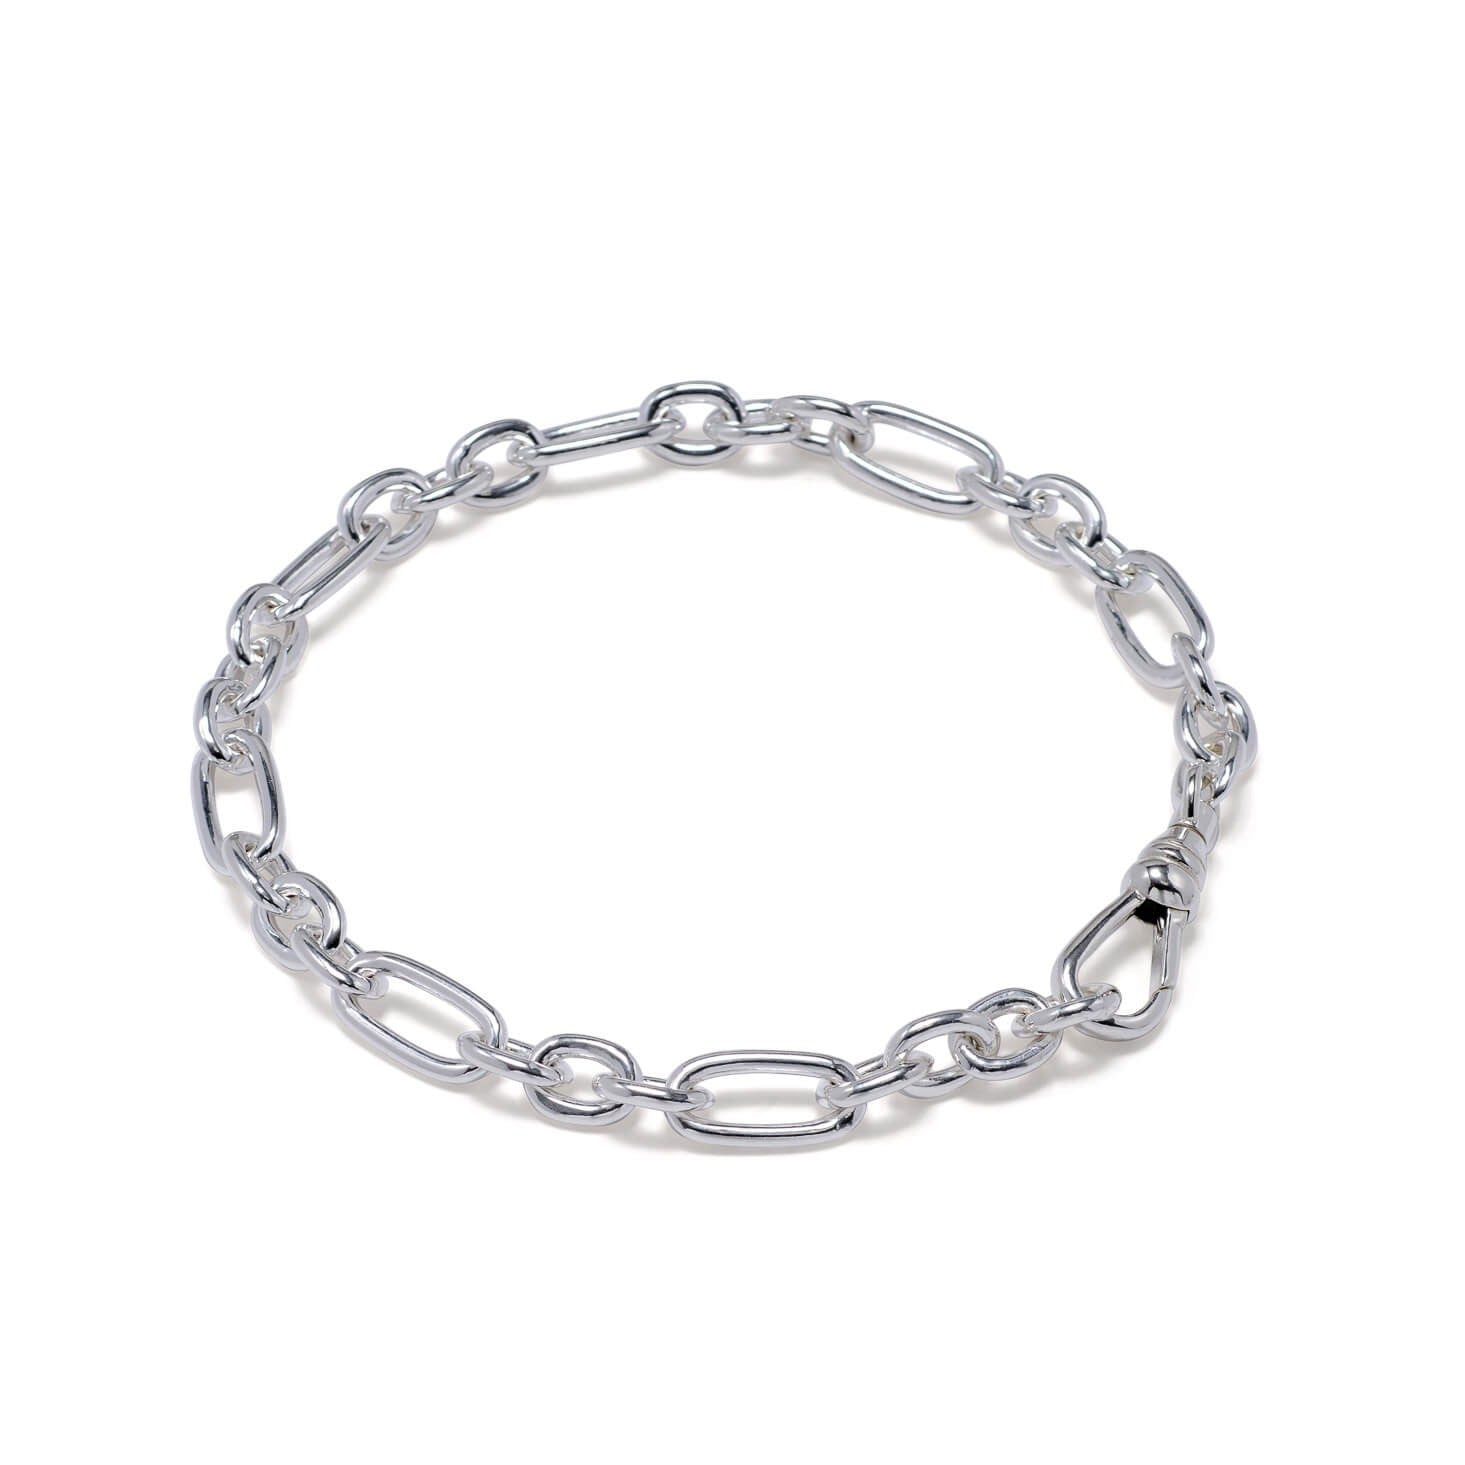 Silver Chain Bracelet - Fetter (7 or 7.5" chain available)